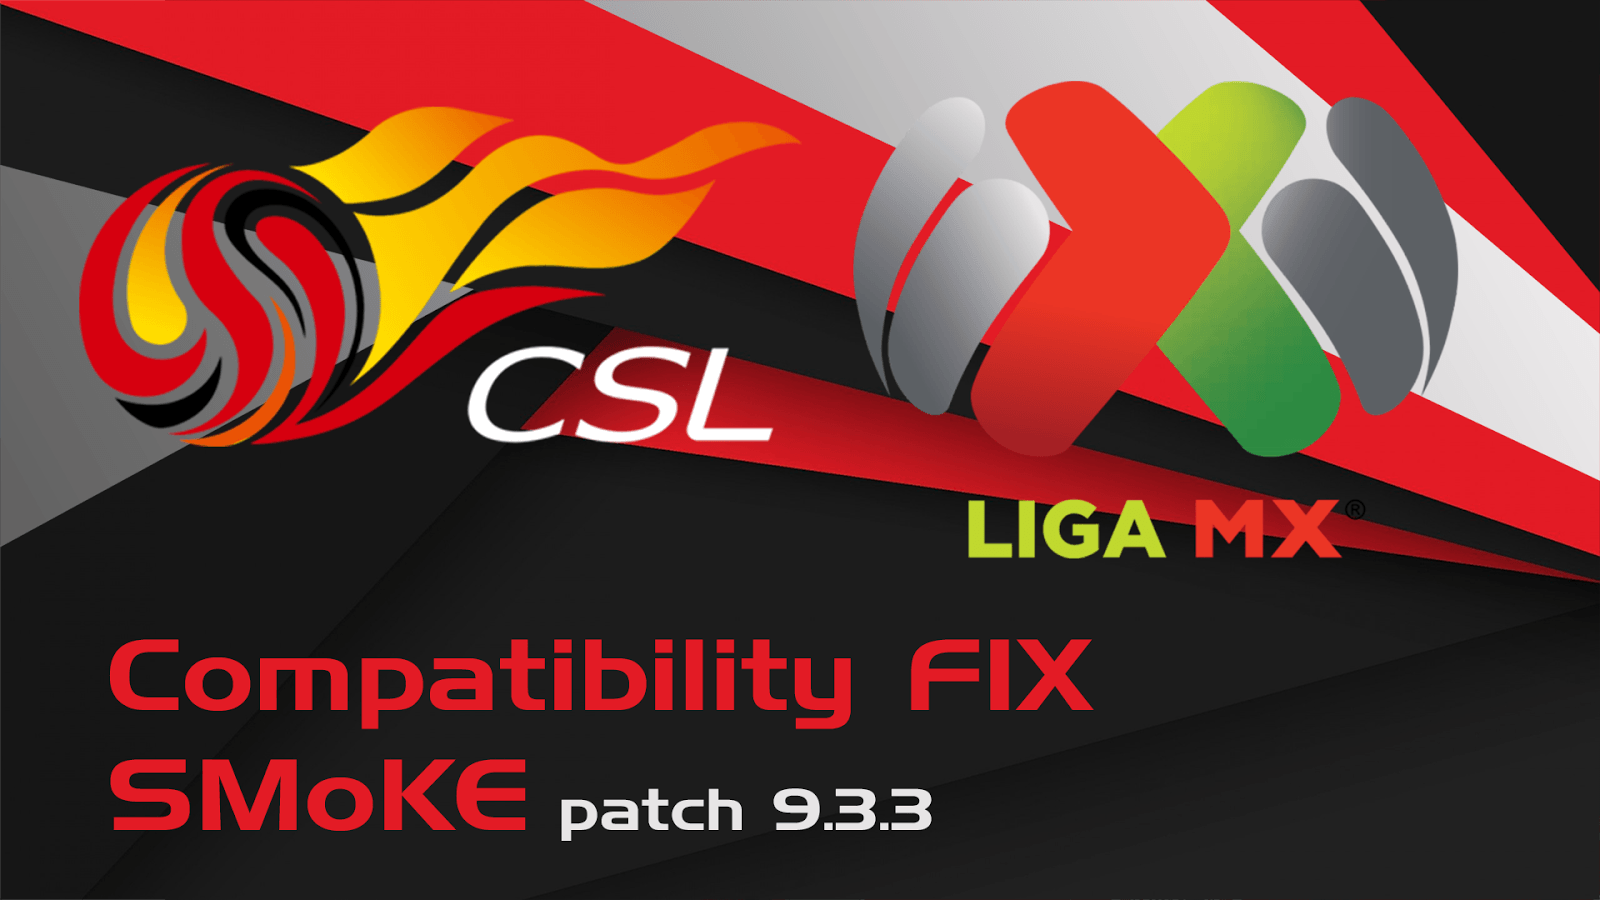 PES 2017 Liga MX and CSL compatibility fix for version 9.3.3